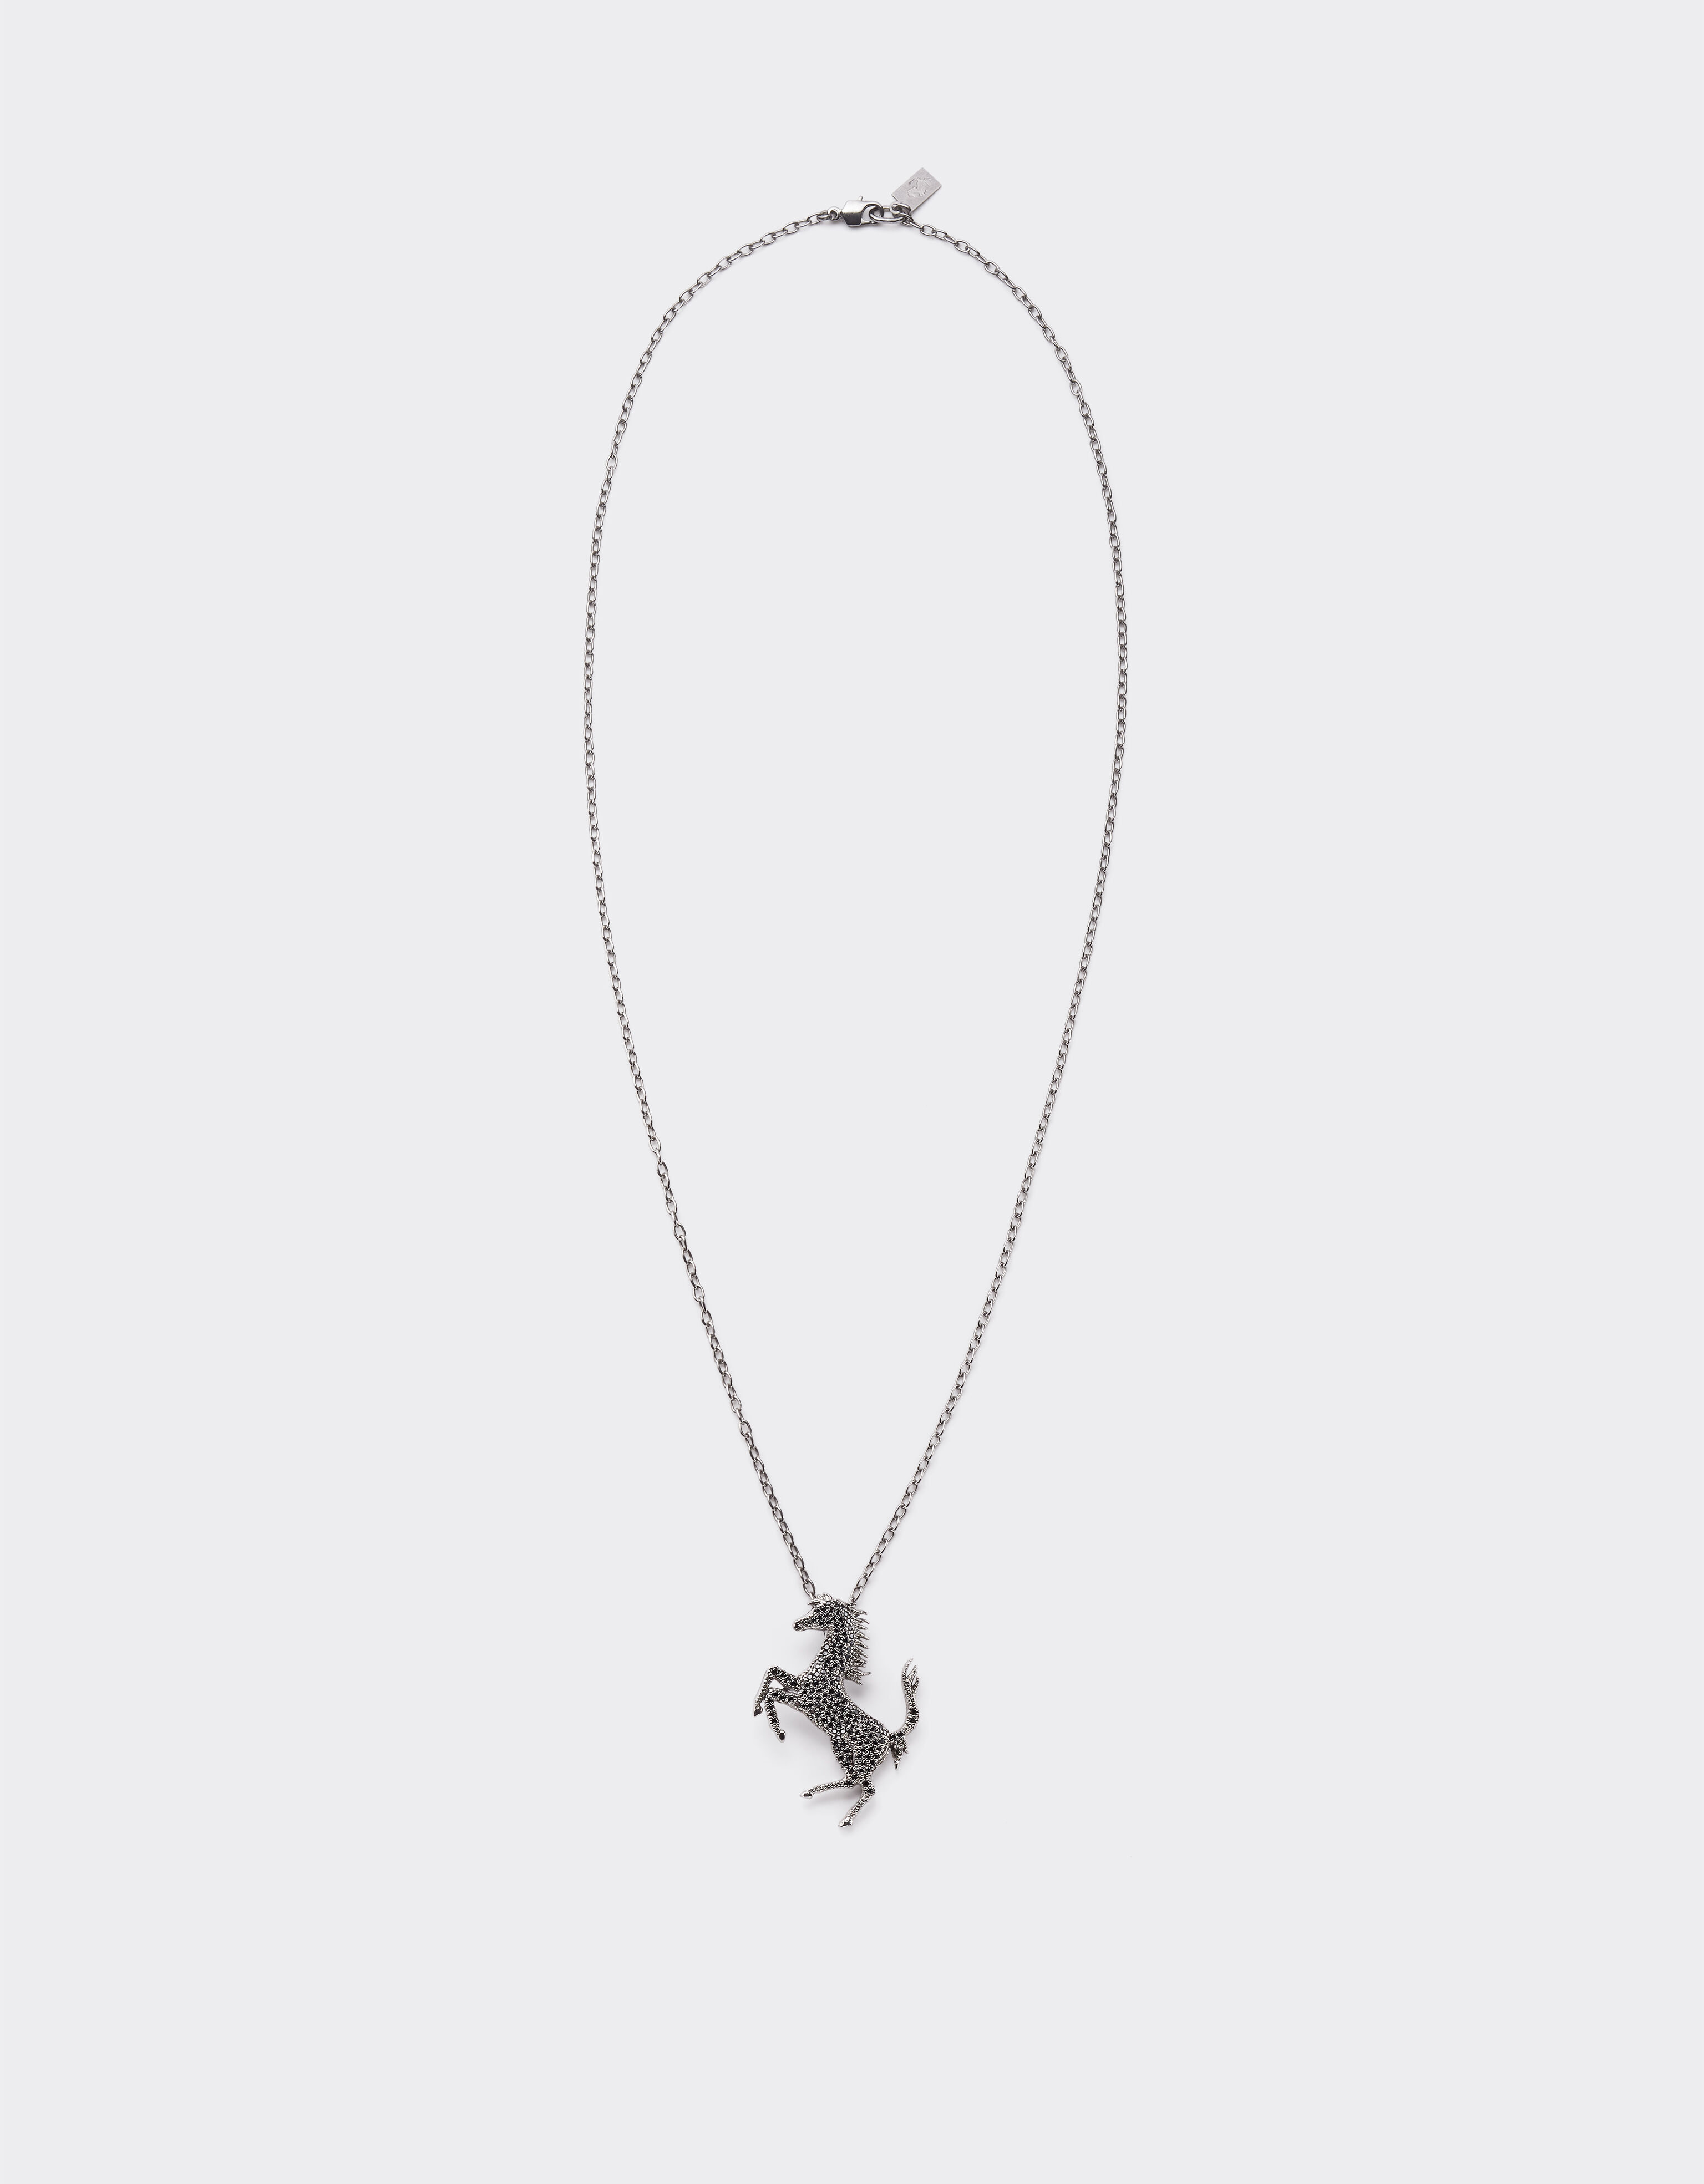 Ferrari Prancing Horse necklace with rhinestones Charcoal 20010f